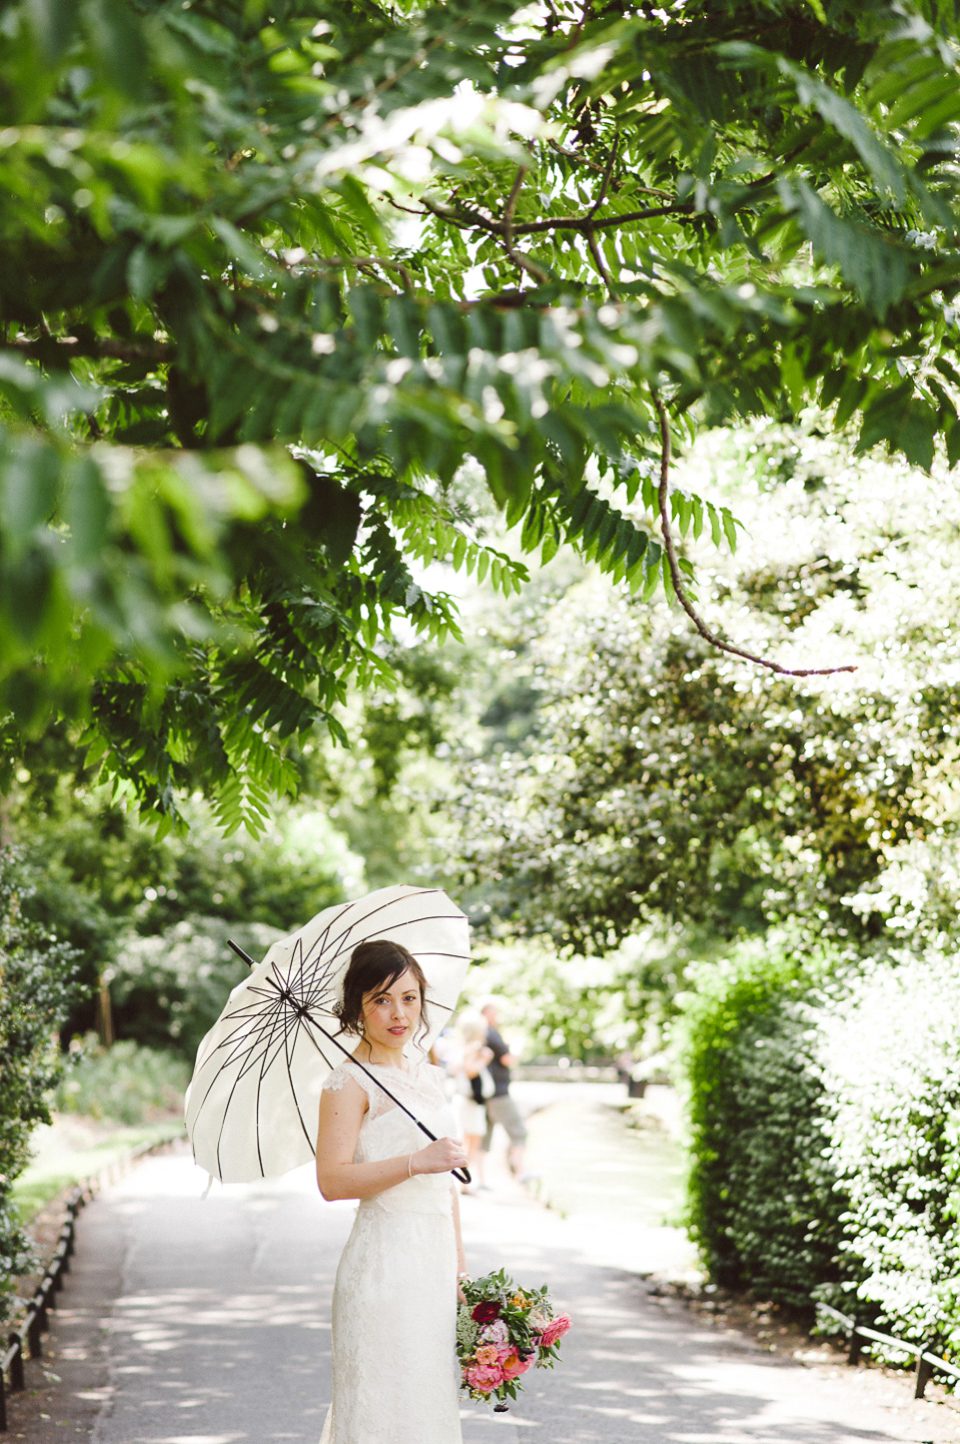 Sally Lacock lace for a modern vintage wedding in Dublin. Photography by Kerry McAllister.